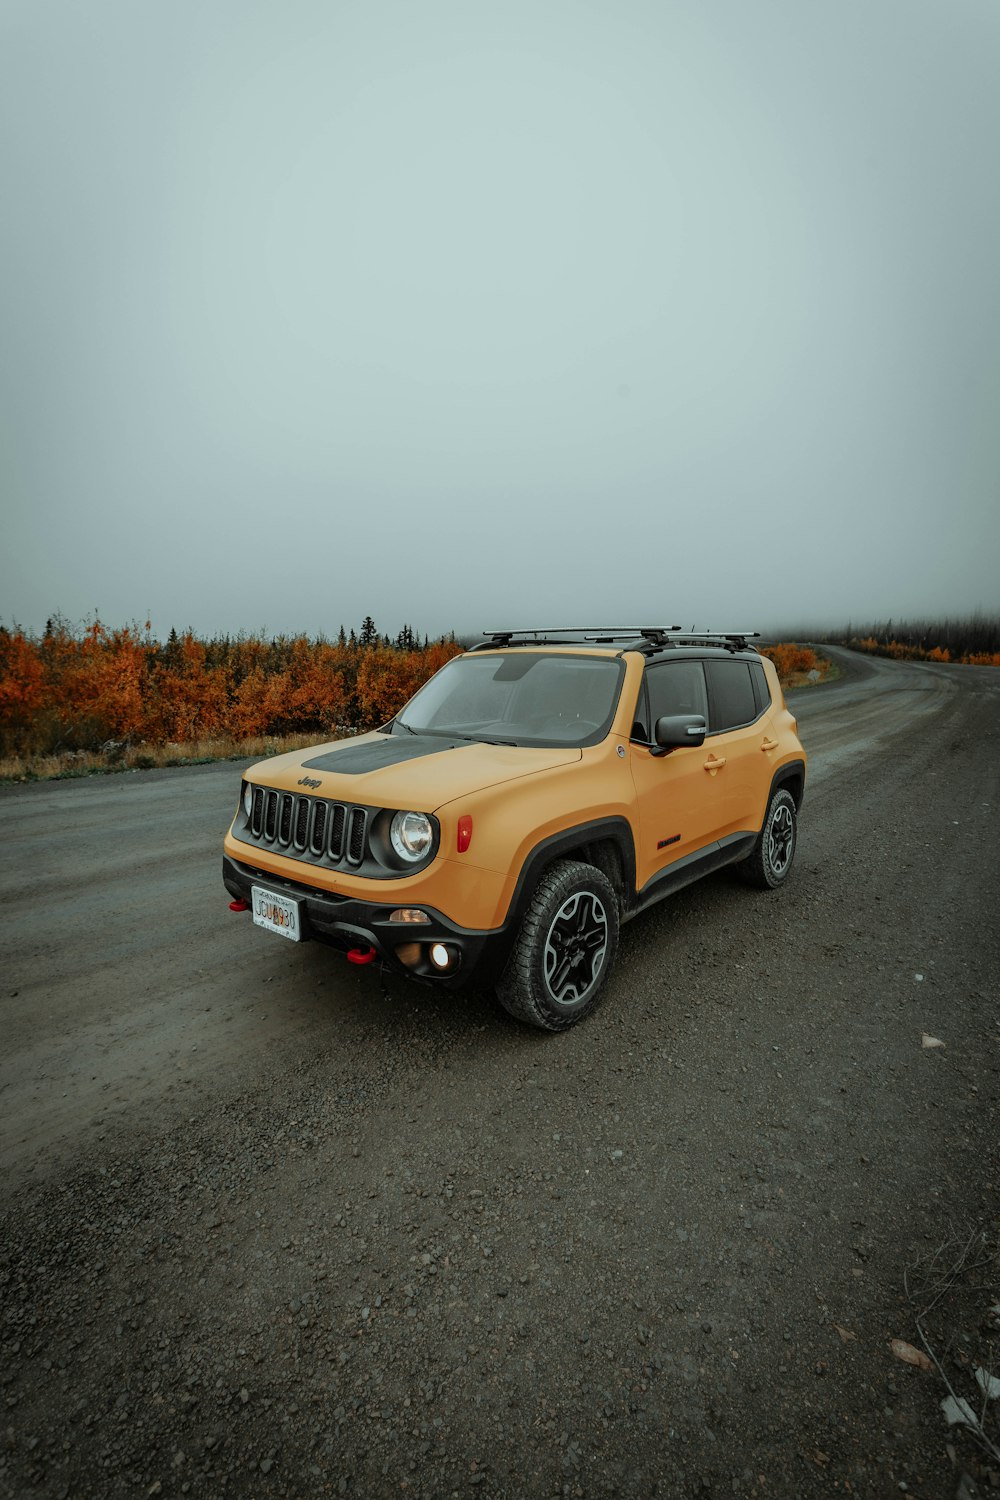 yellow and black jeep grand cherokee on road